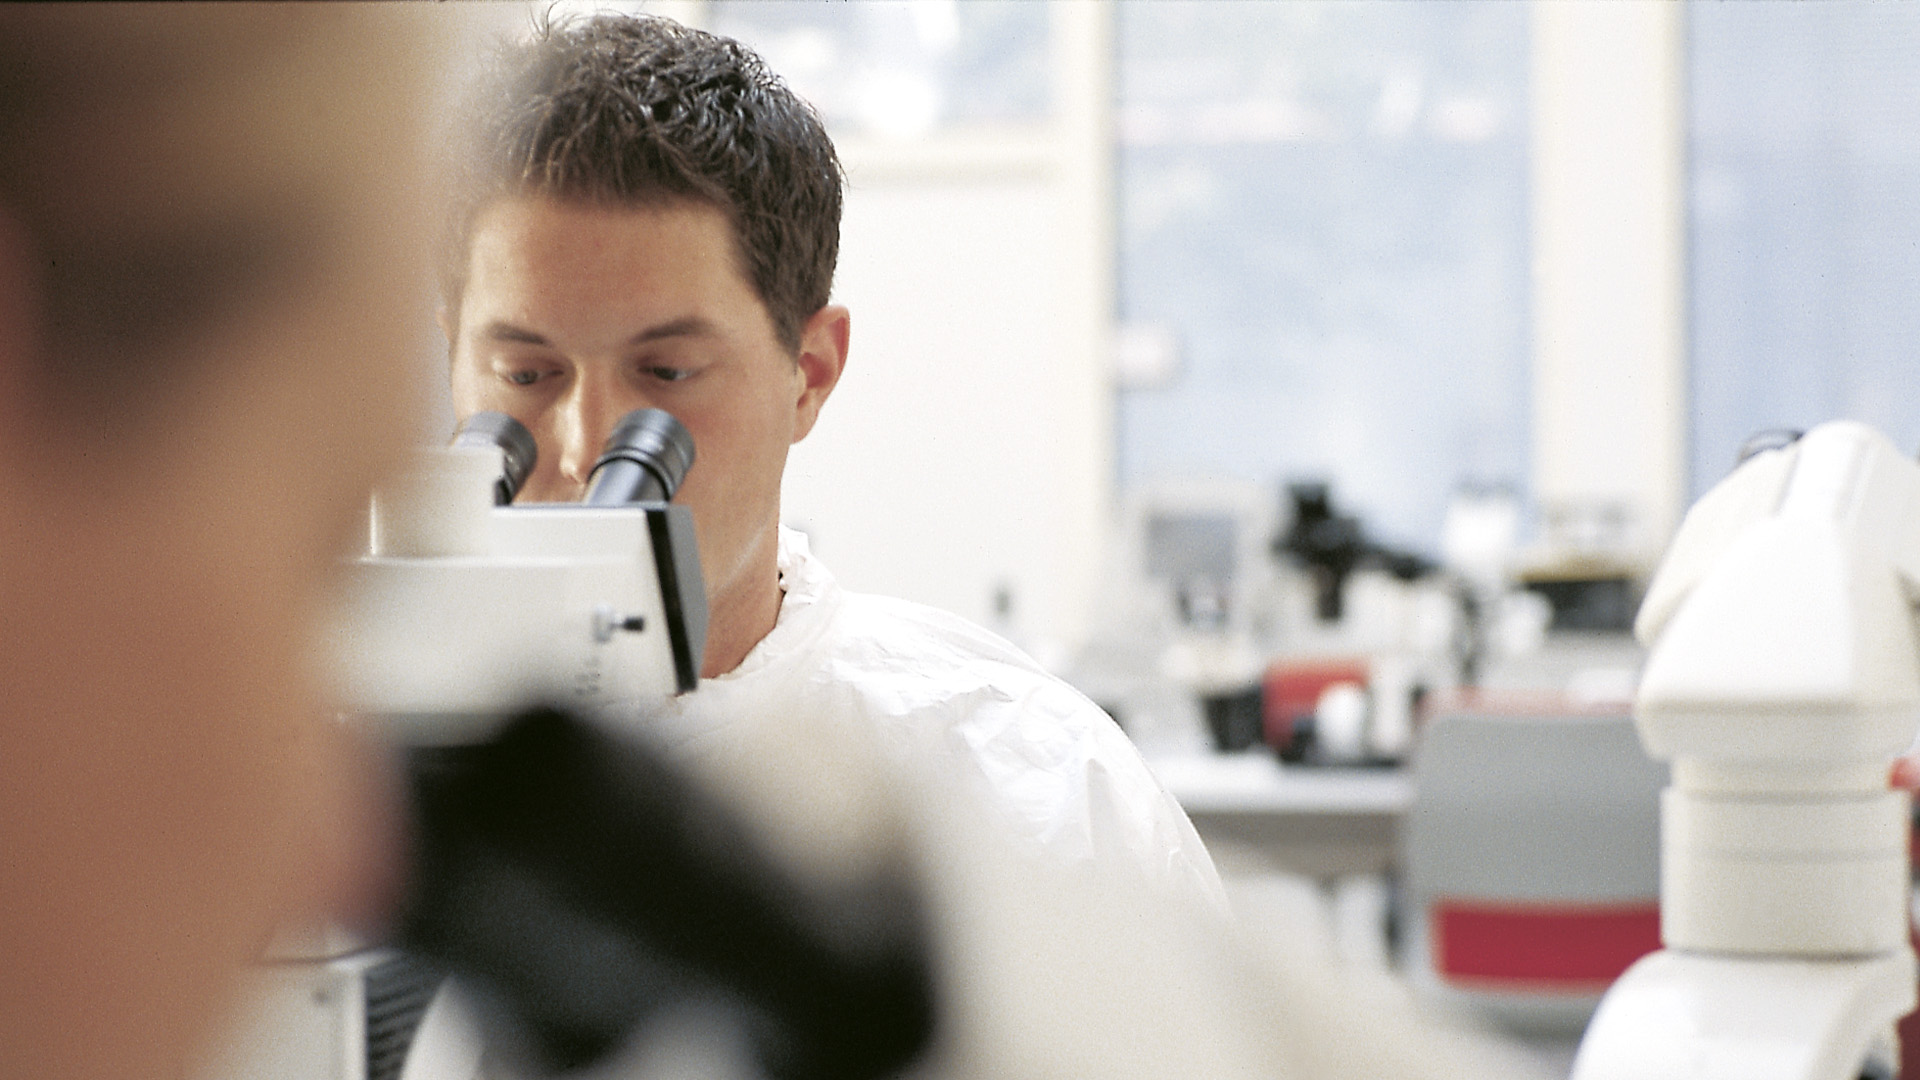 Efficient microscope workflows help pathologists can make accurate and timely diagnoses.